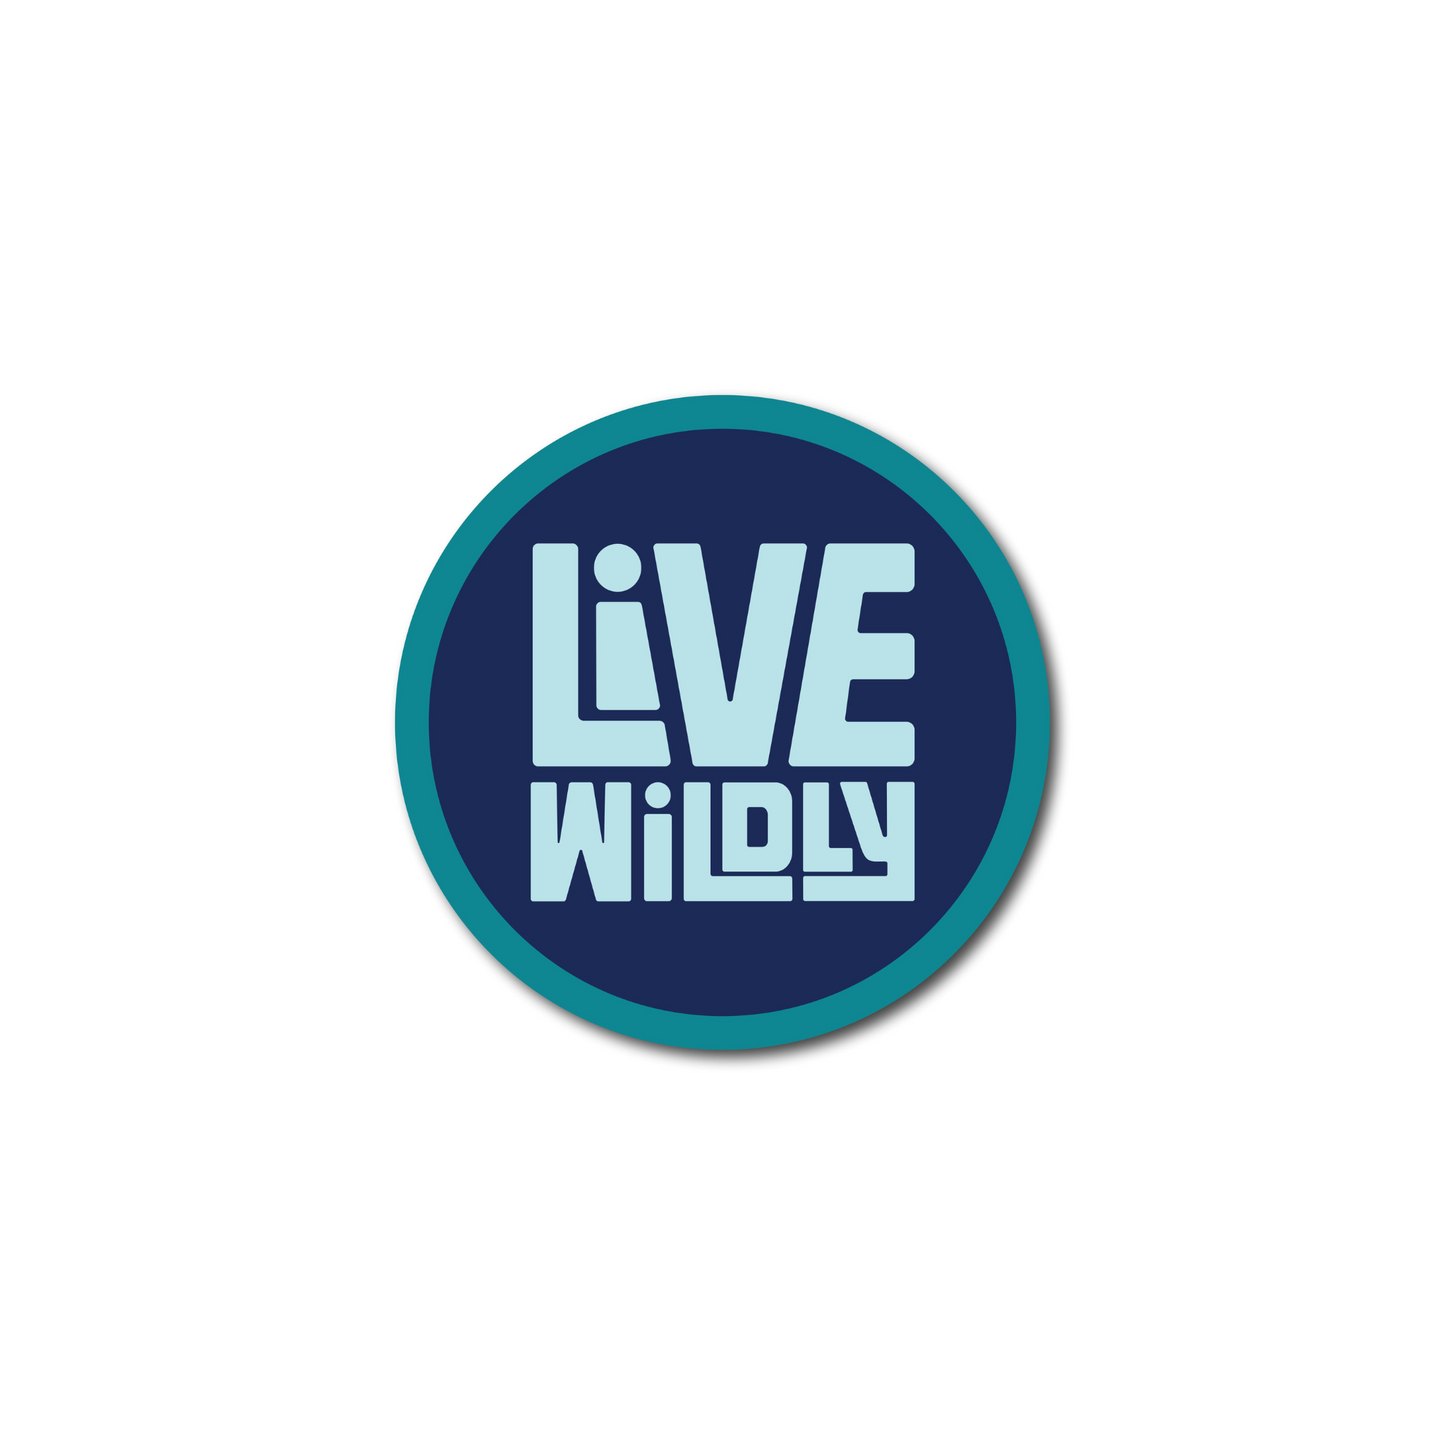 Live Wildly Round Stickers - Navy And Aqua -Live Wildly 